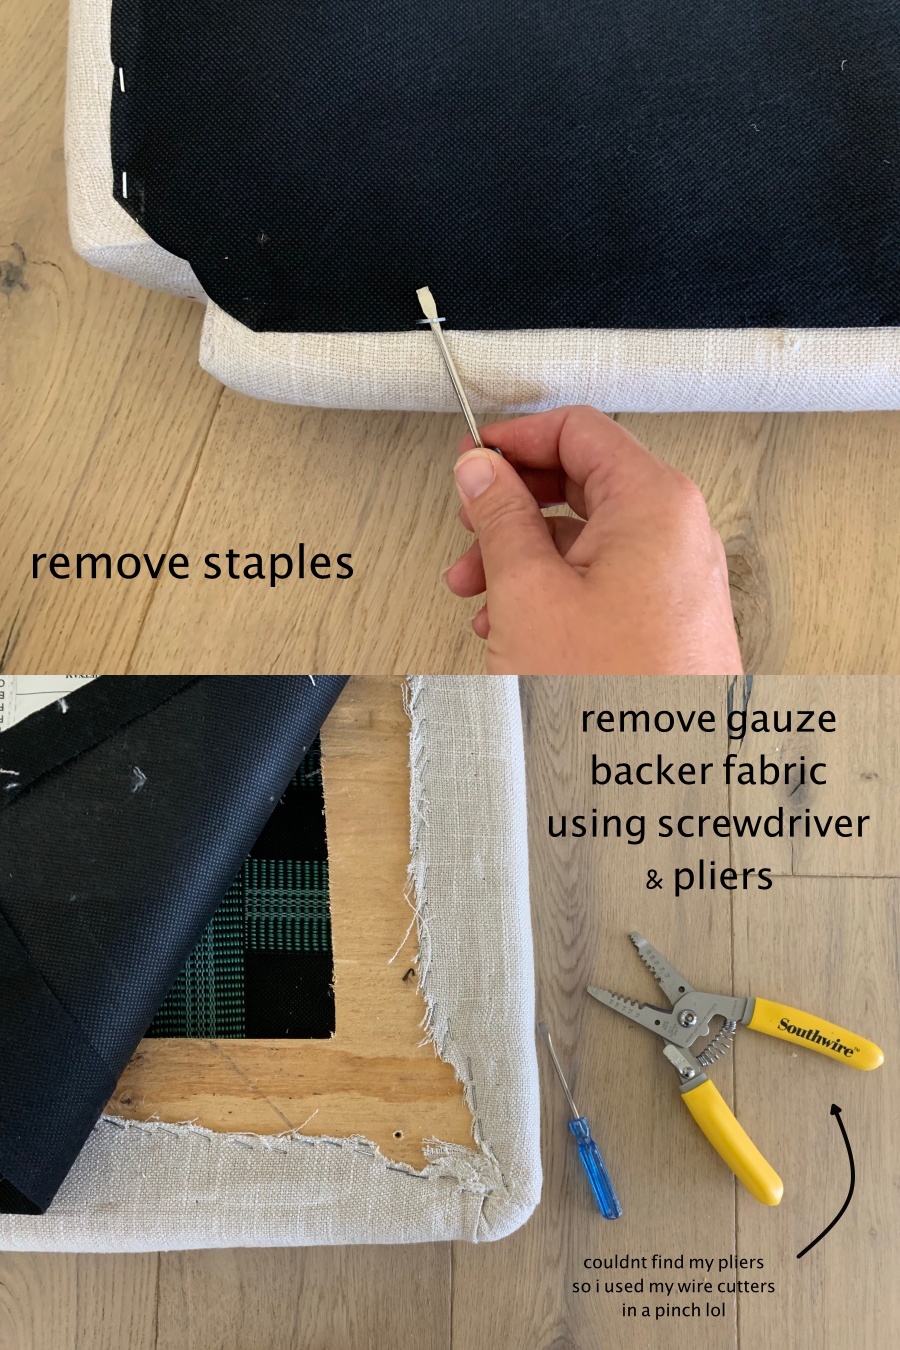 How To Reupholster Bar Stools Be Kid, How To Recover Bar Stool Seats